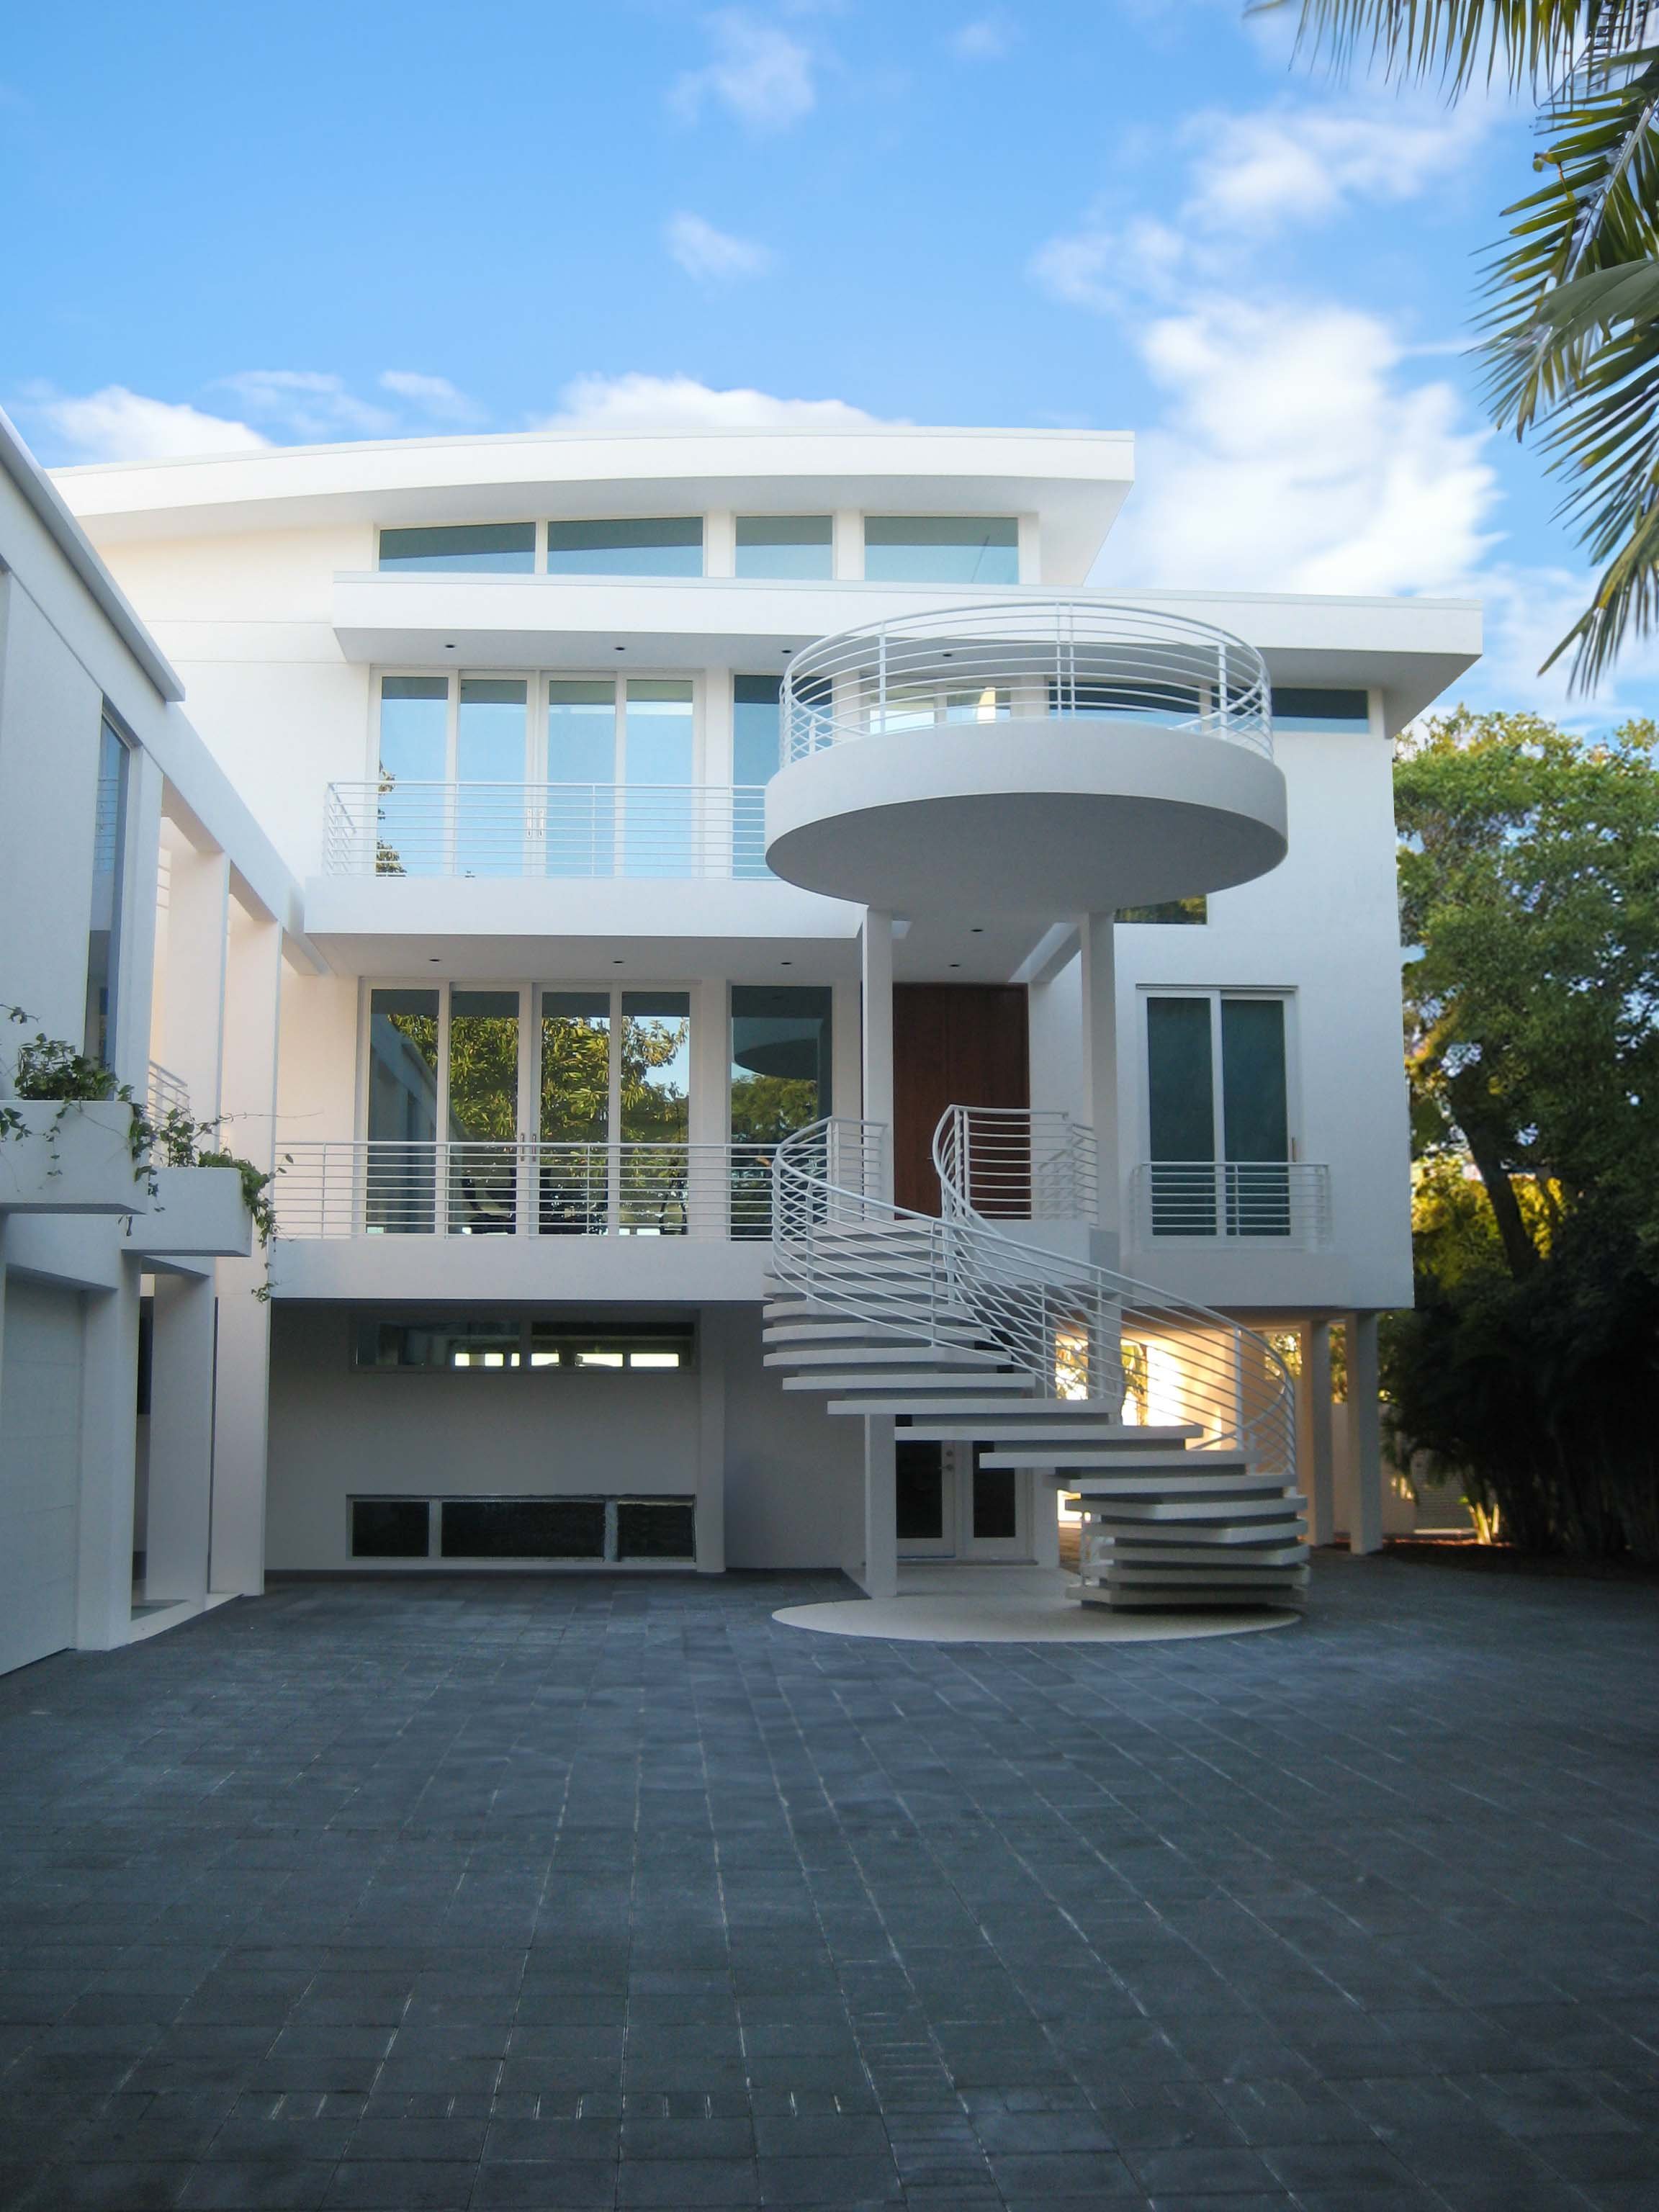 Sarasota Home SOLSTICE Planning and Architecture.jpg